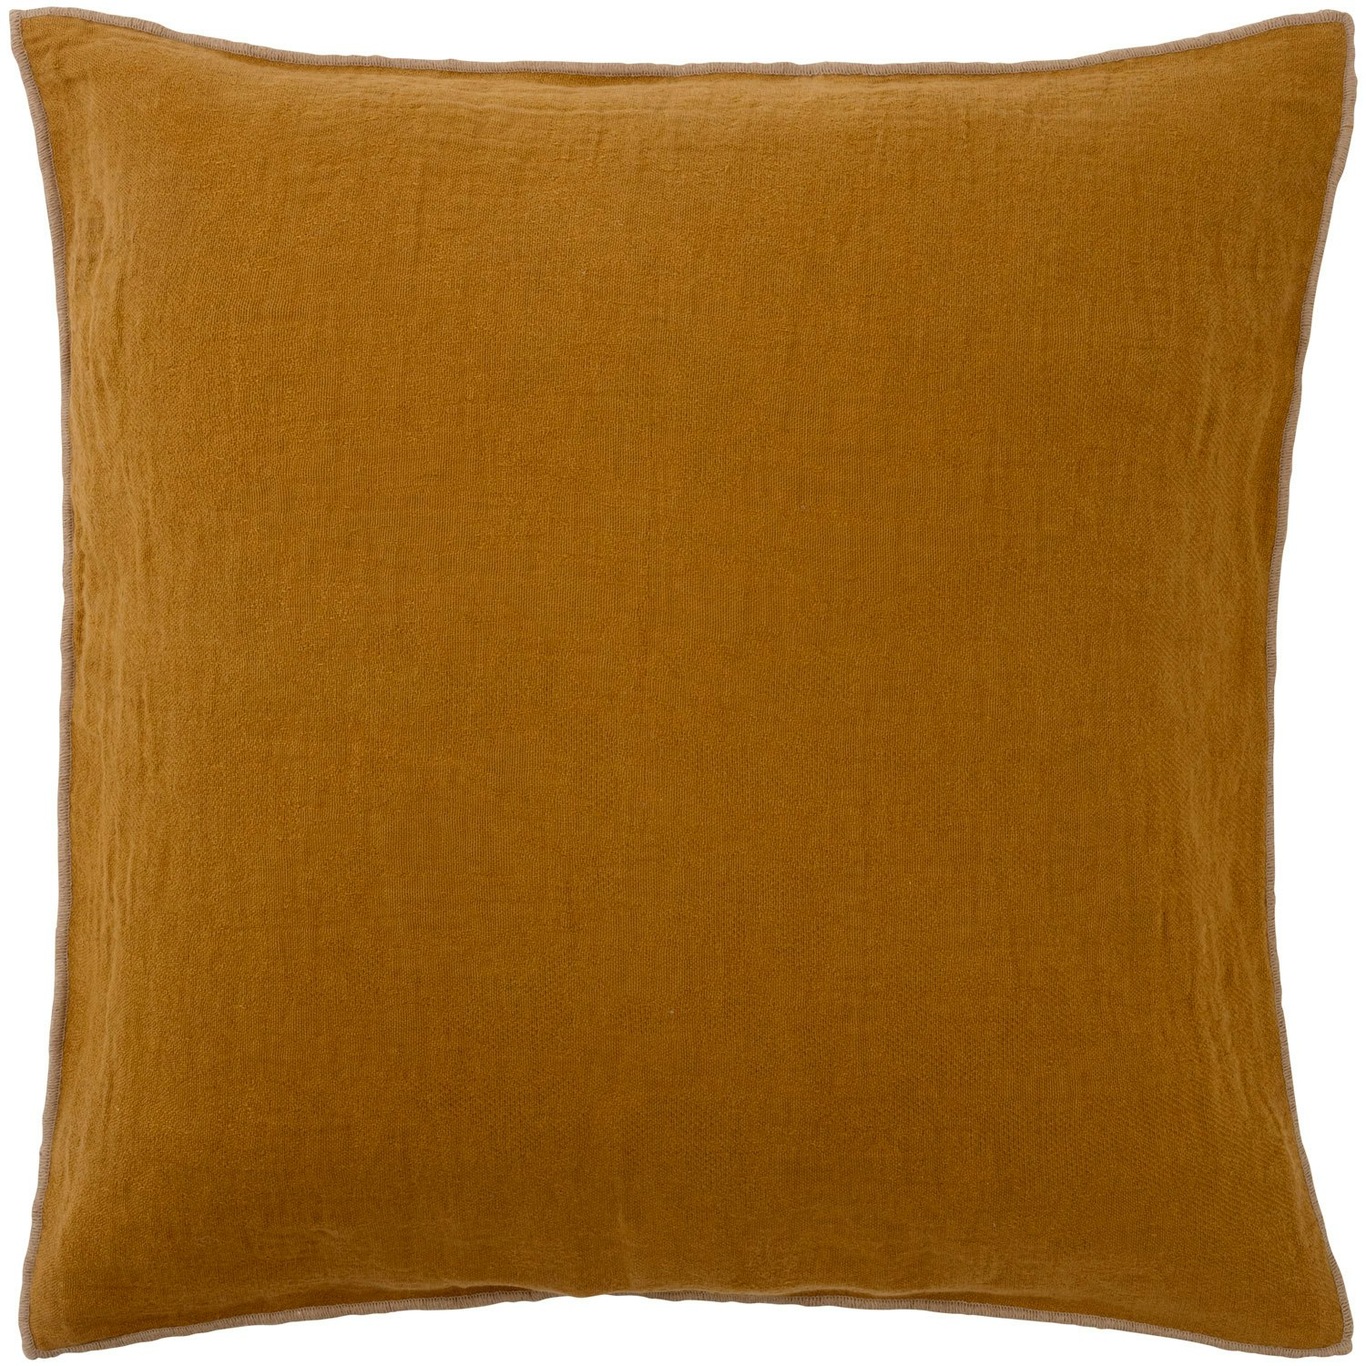 Evy Cushion Cover 50x50 cm, Ginger